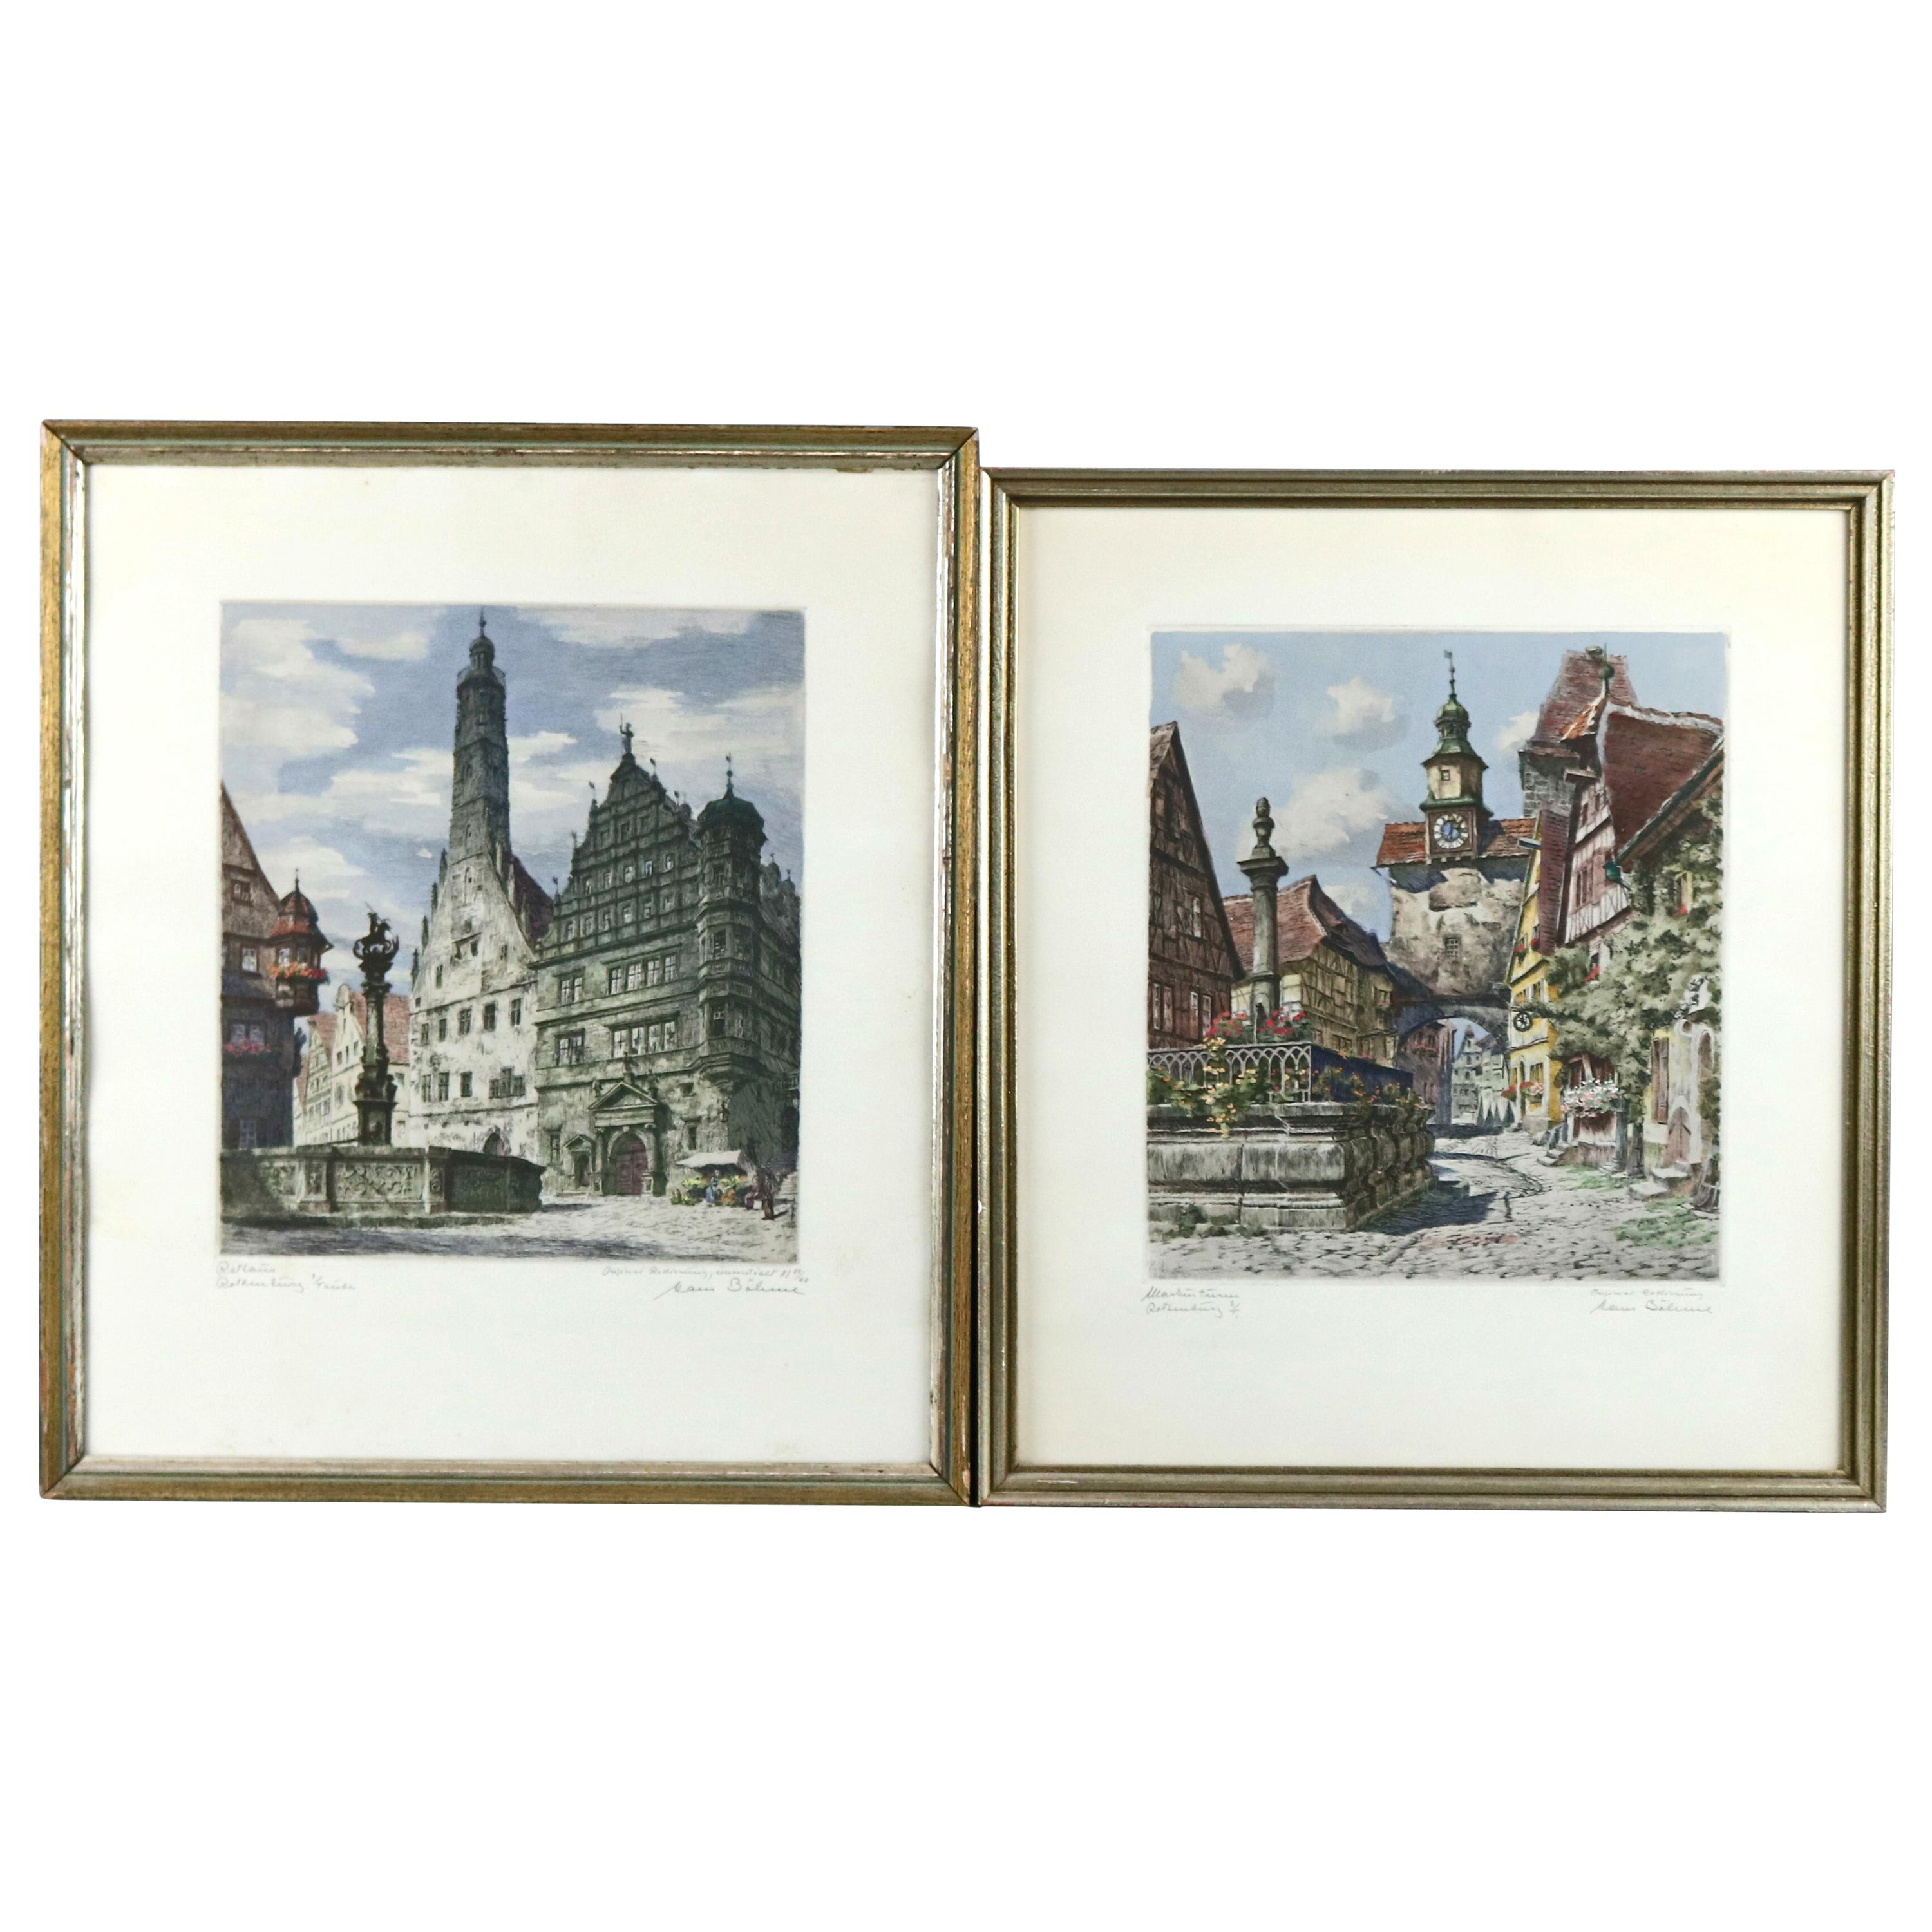 Antique Bavarian Pencil Signed Etchings of Rothenburg Street Scenes, circa 1900